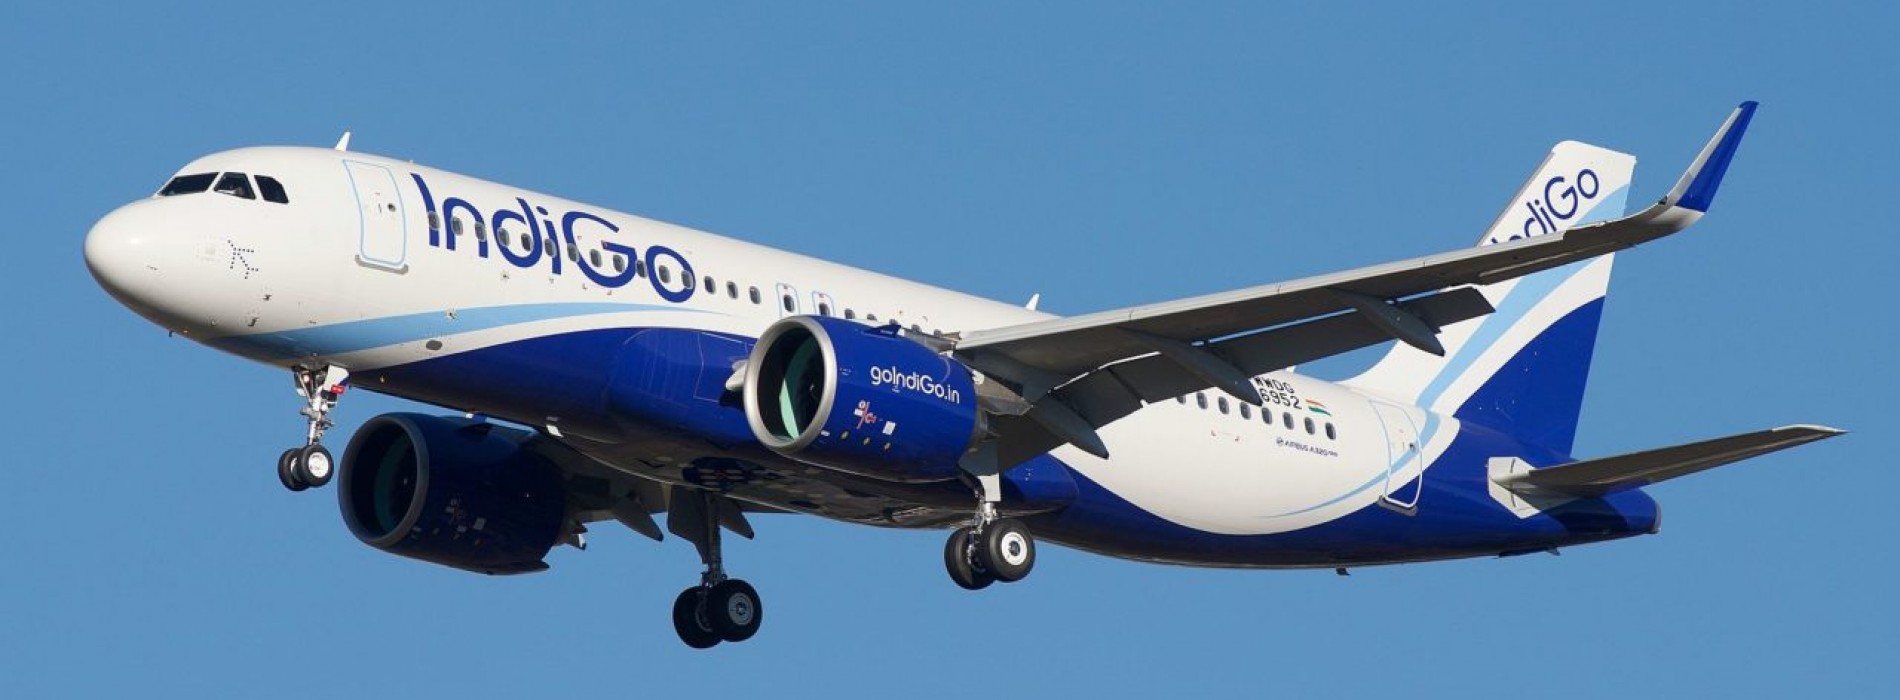 GoAir offers flight tickets from Rs 999 in monsoon sale